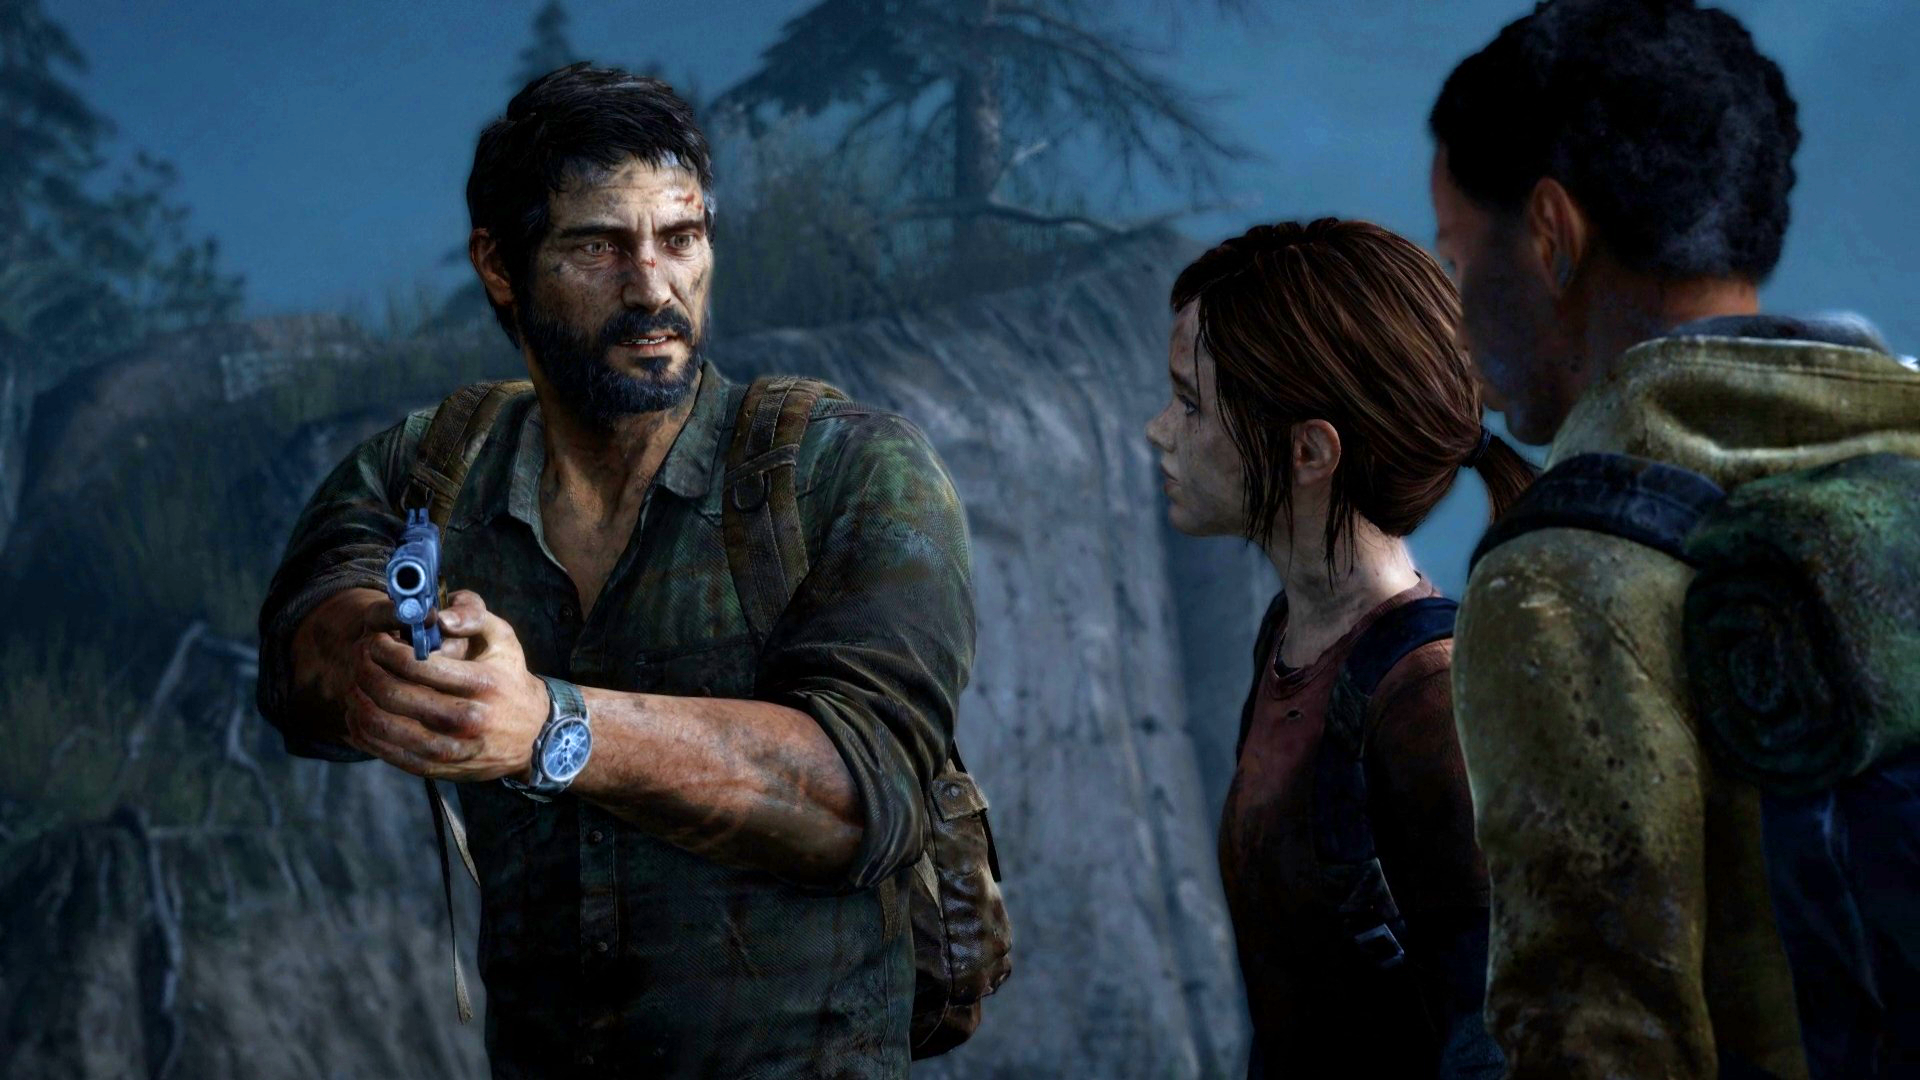 Зе ласт оф ас пс. Джоэл the last of us. Гэбриел Луна the last of us. The last of us 1.